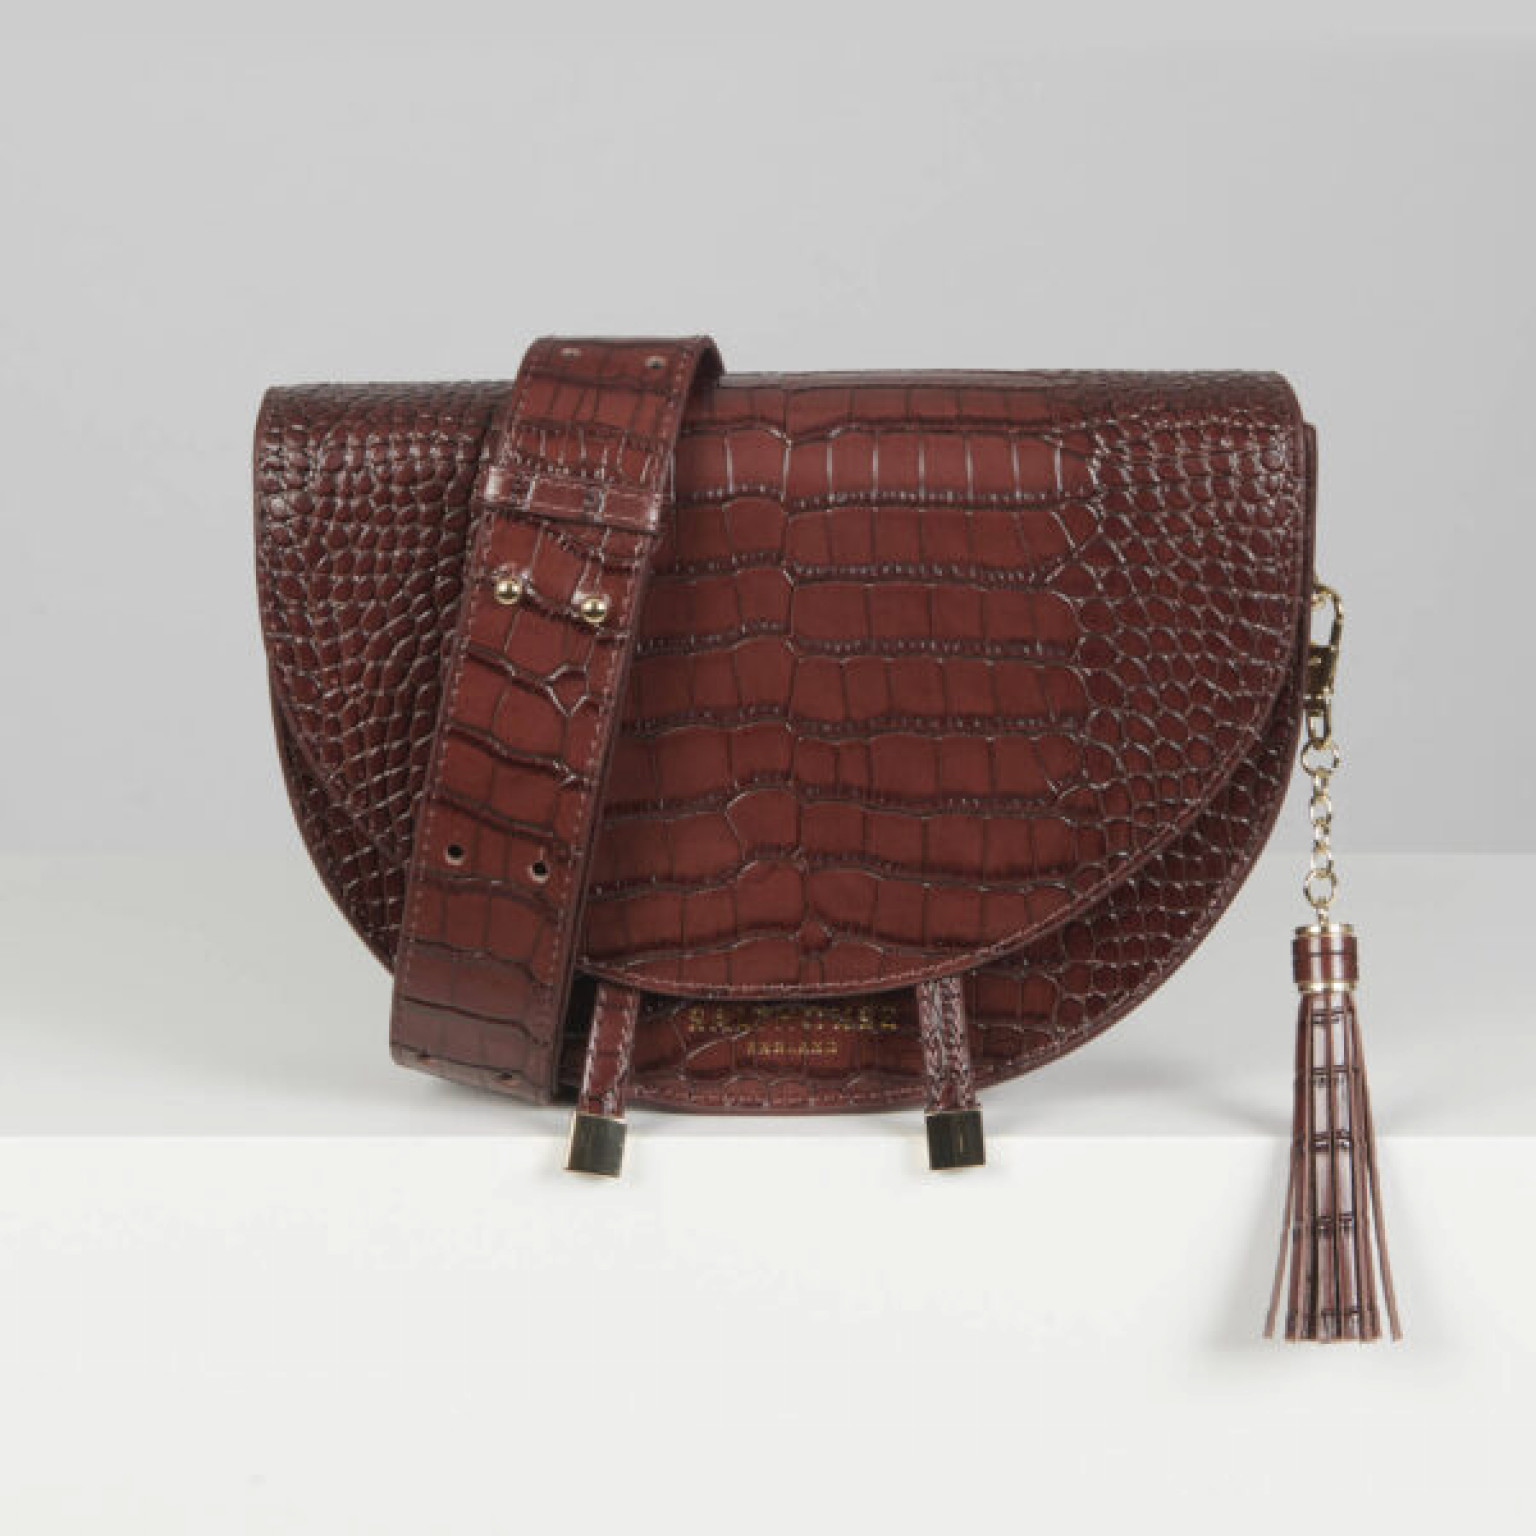 Salthouse Floriana Croc Embossed Bag Cocoa